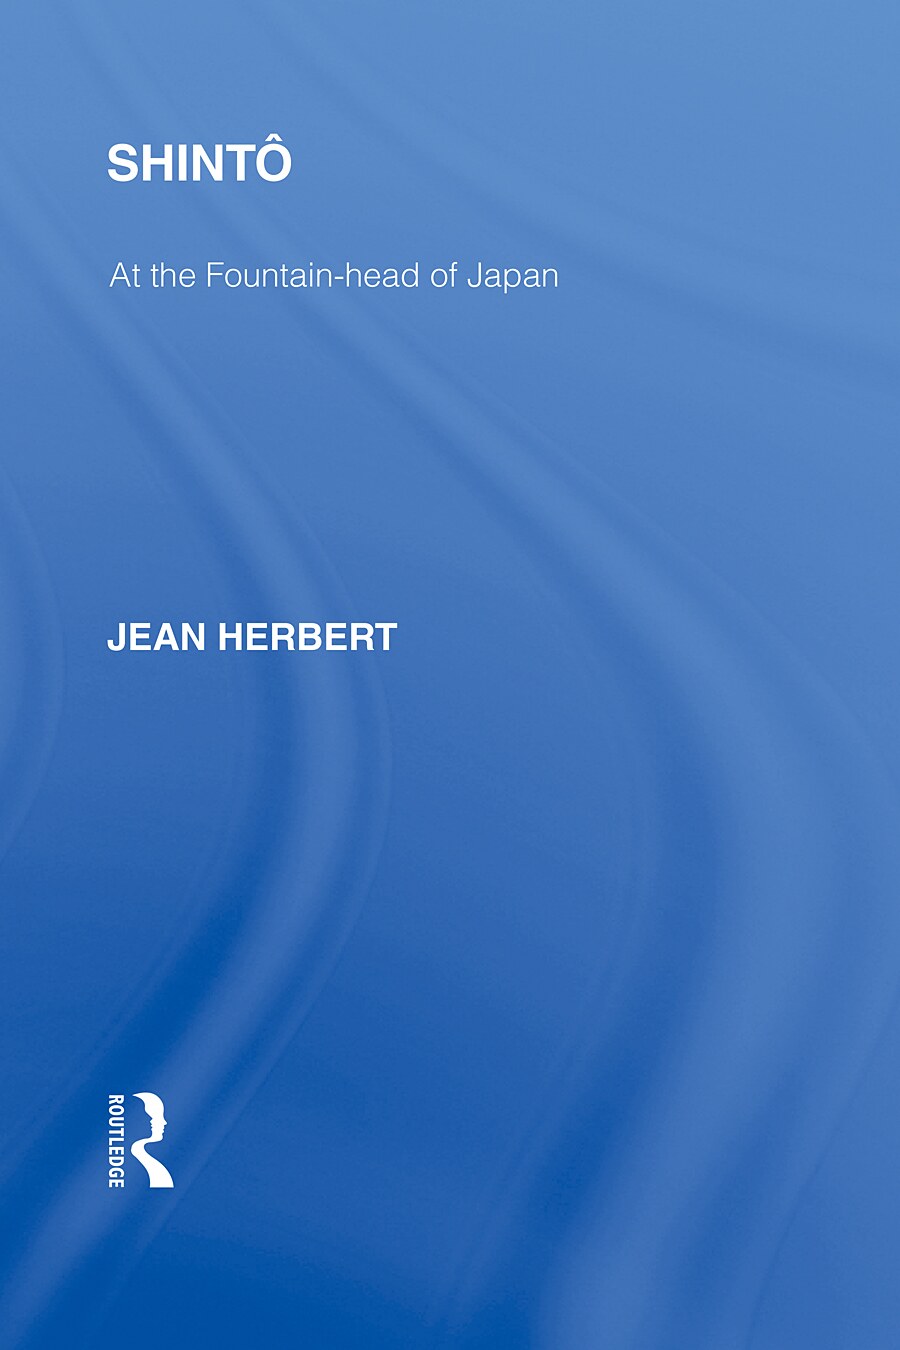 Shintô: At the Fountain-head of Japan, Volume 81